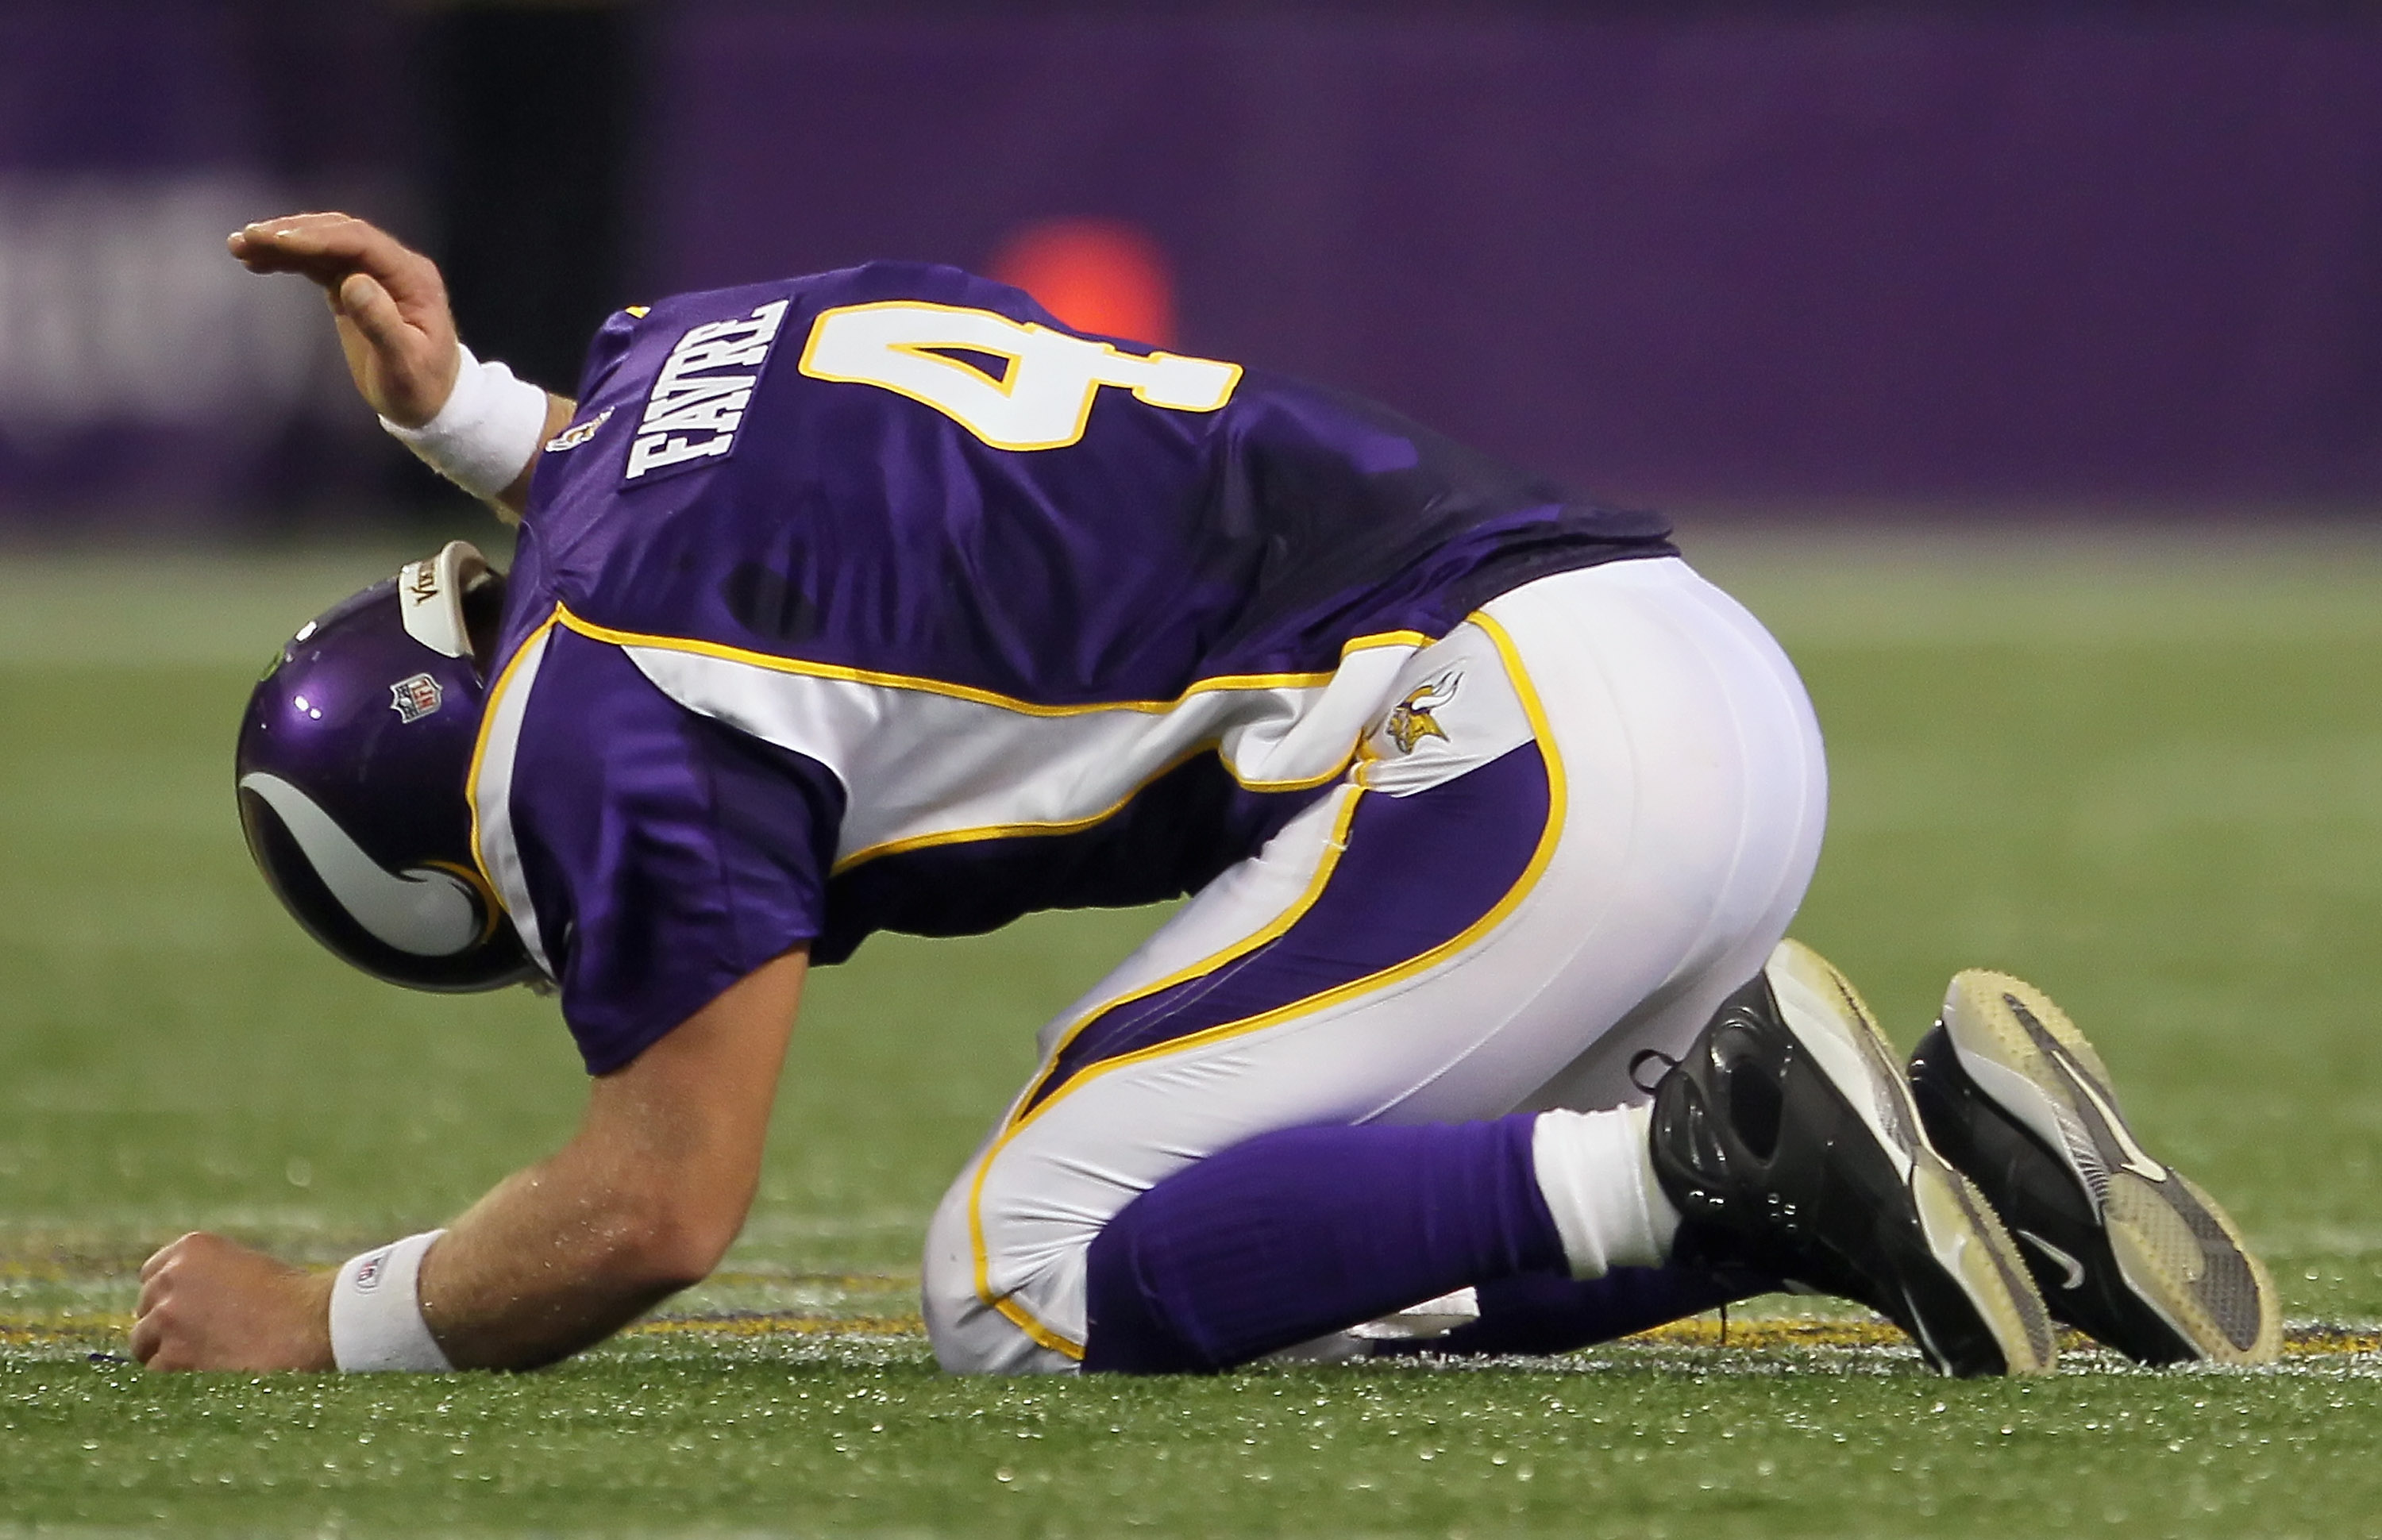 MINNEAPOLIS - SEPTEMBER 26:  Quarterback Brett Favre #4 of the Minnesota Vikings reacts after throwing an incomplete pass against the Detroit Lions at Mall of America Field on September 26, 2010 in Minneapolis, Minnesota.  (Photo by Jeff Gross/Getty Image